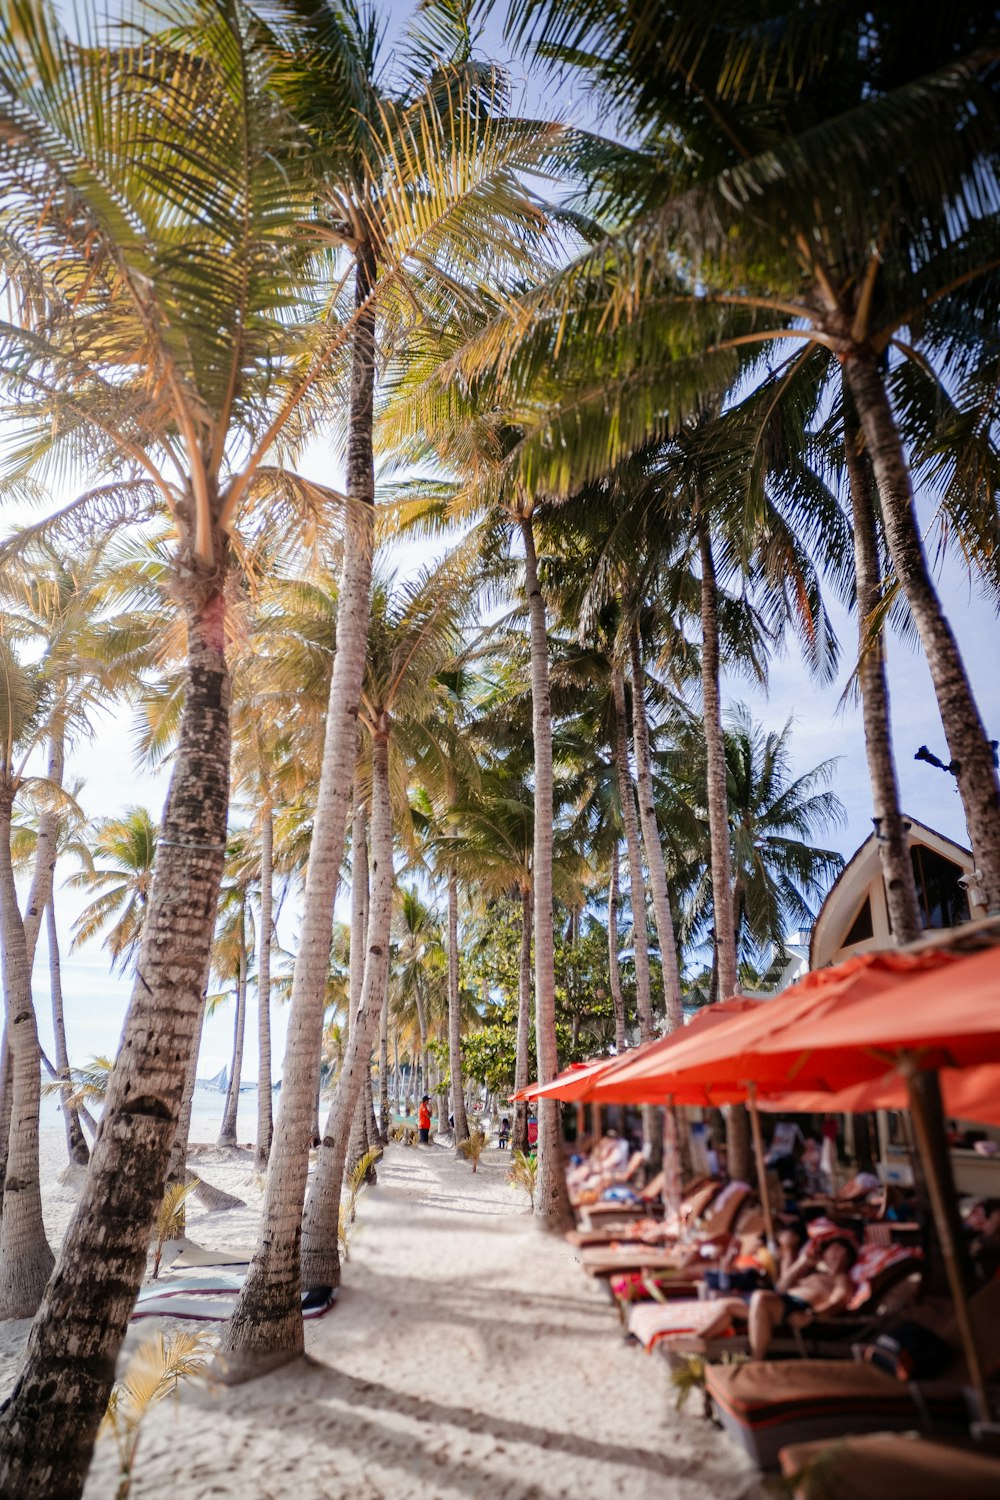 a sandy beach lined with palm trees and umbrellas